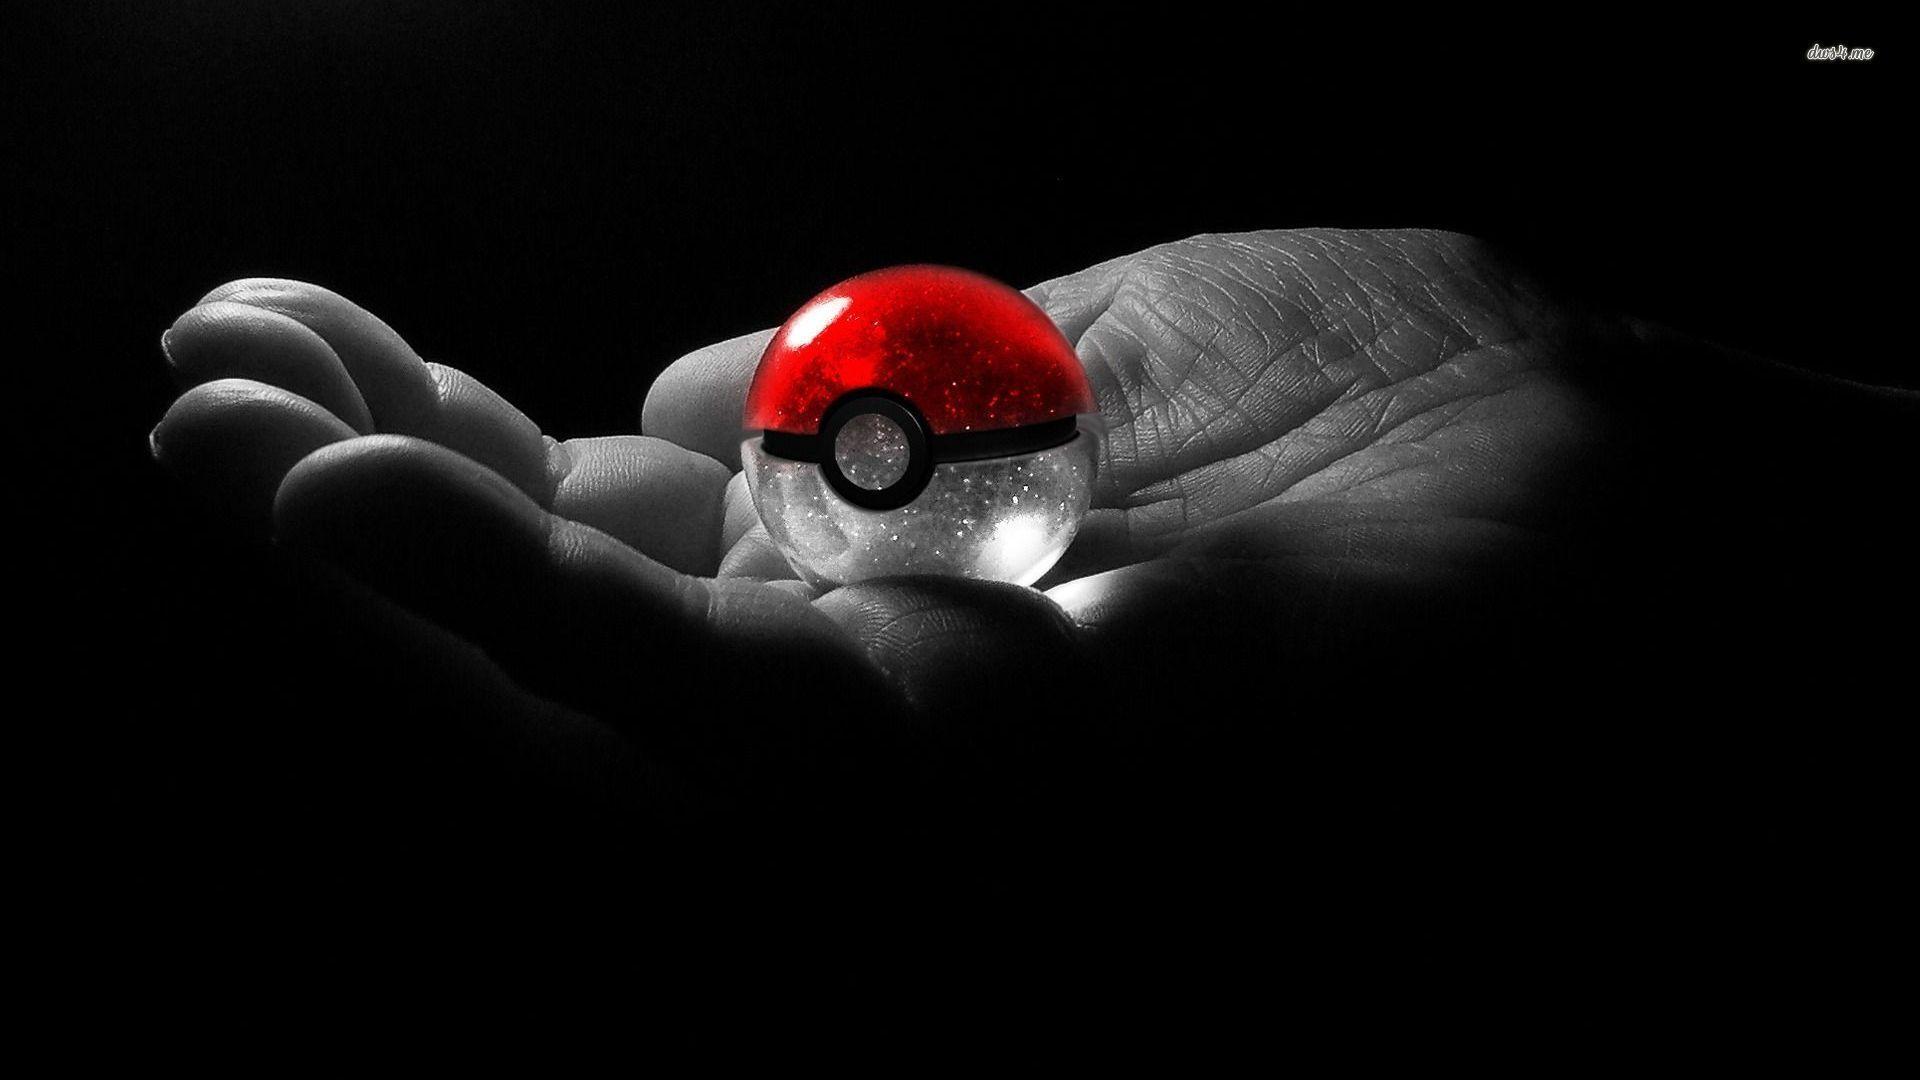 Wallpapers For > Pokeball Wallpapers For Computer